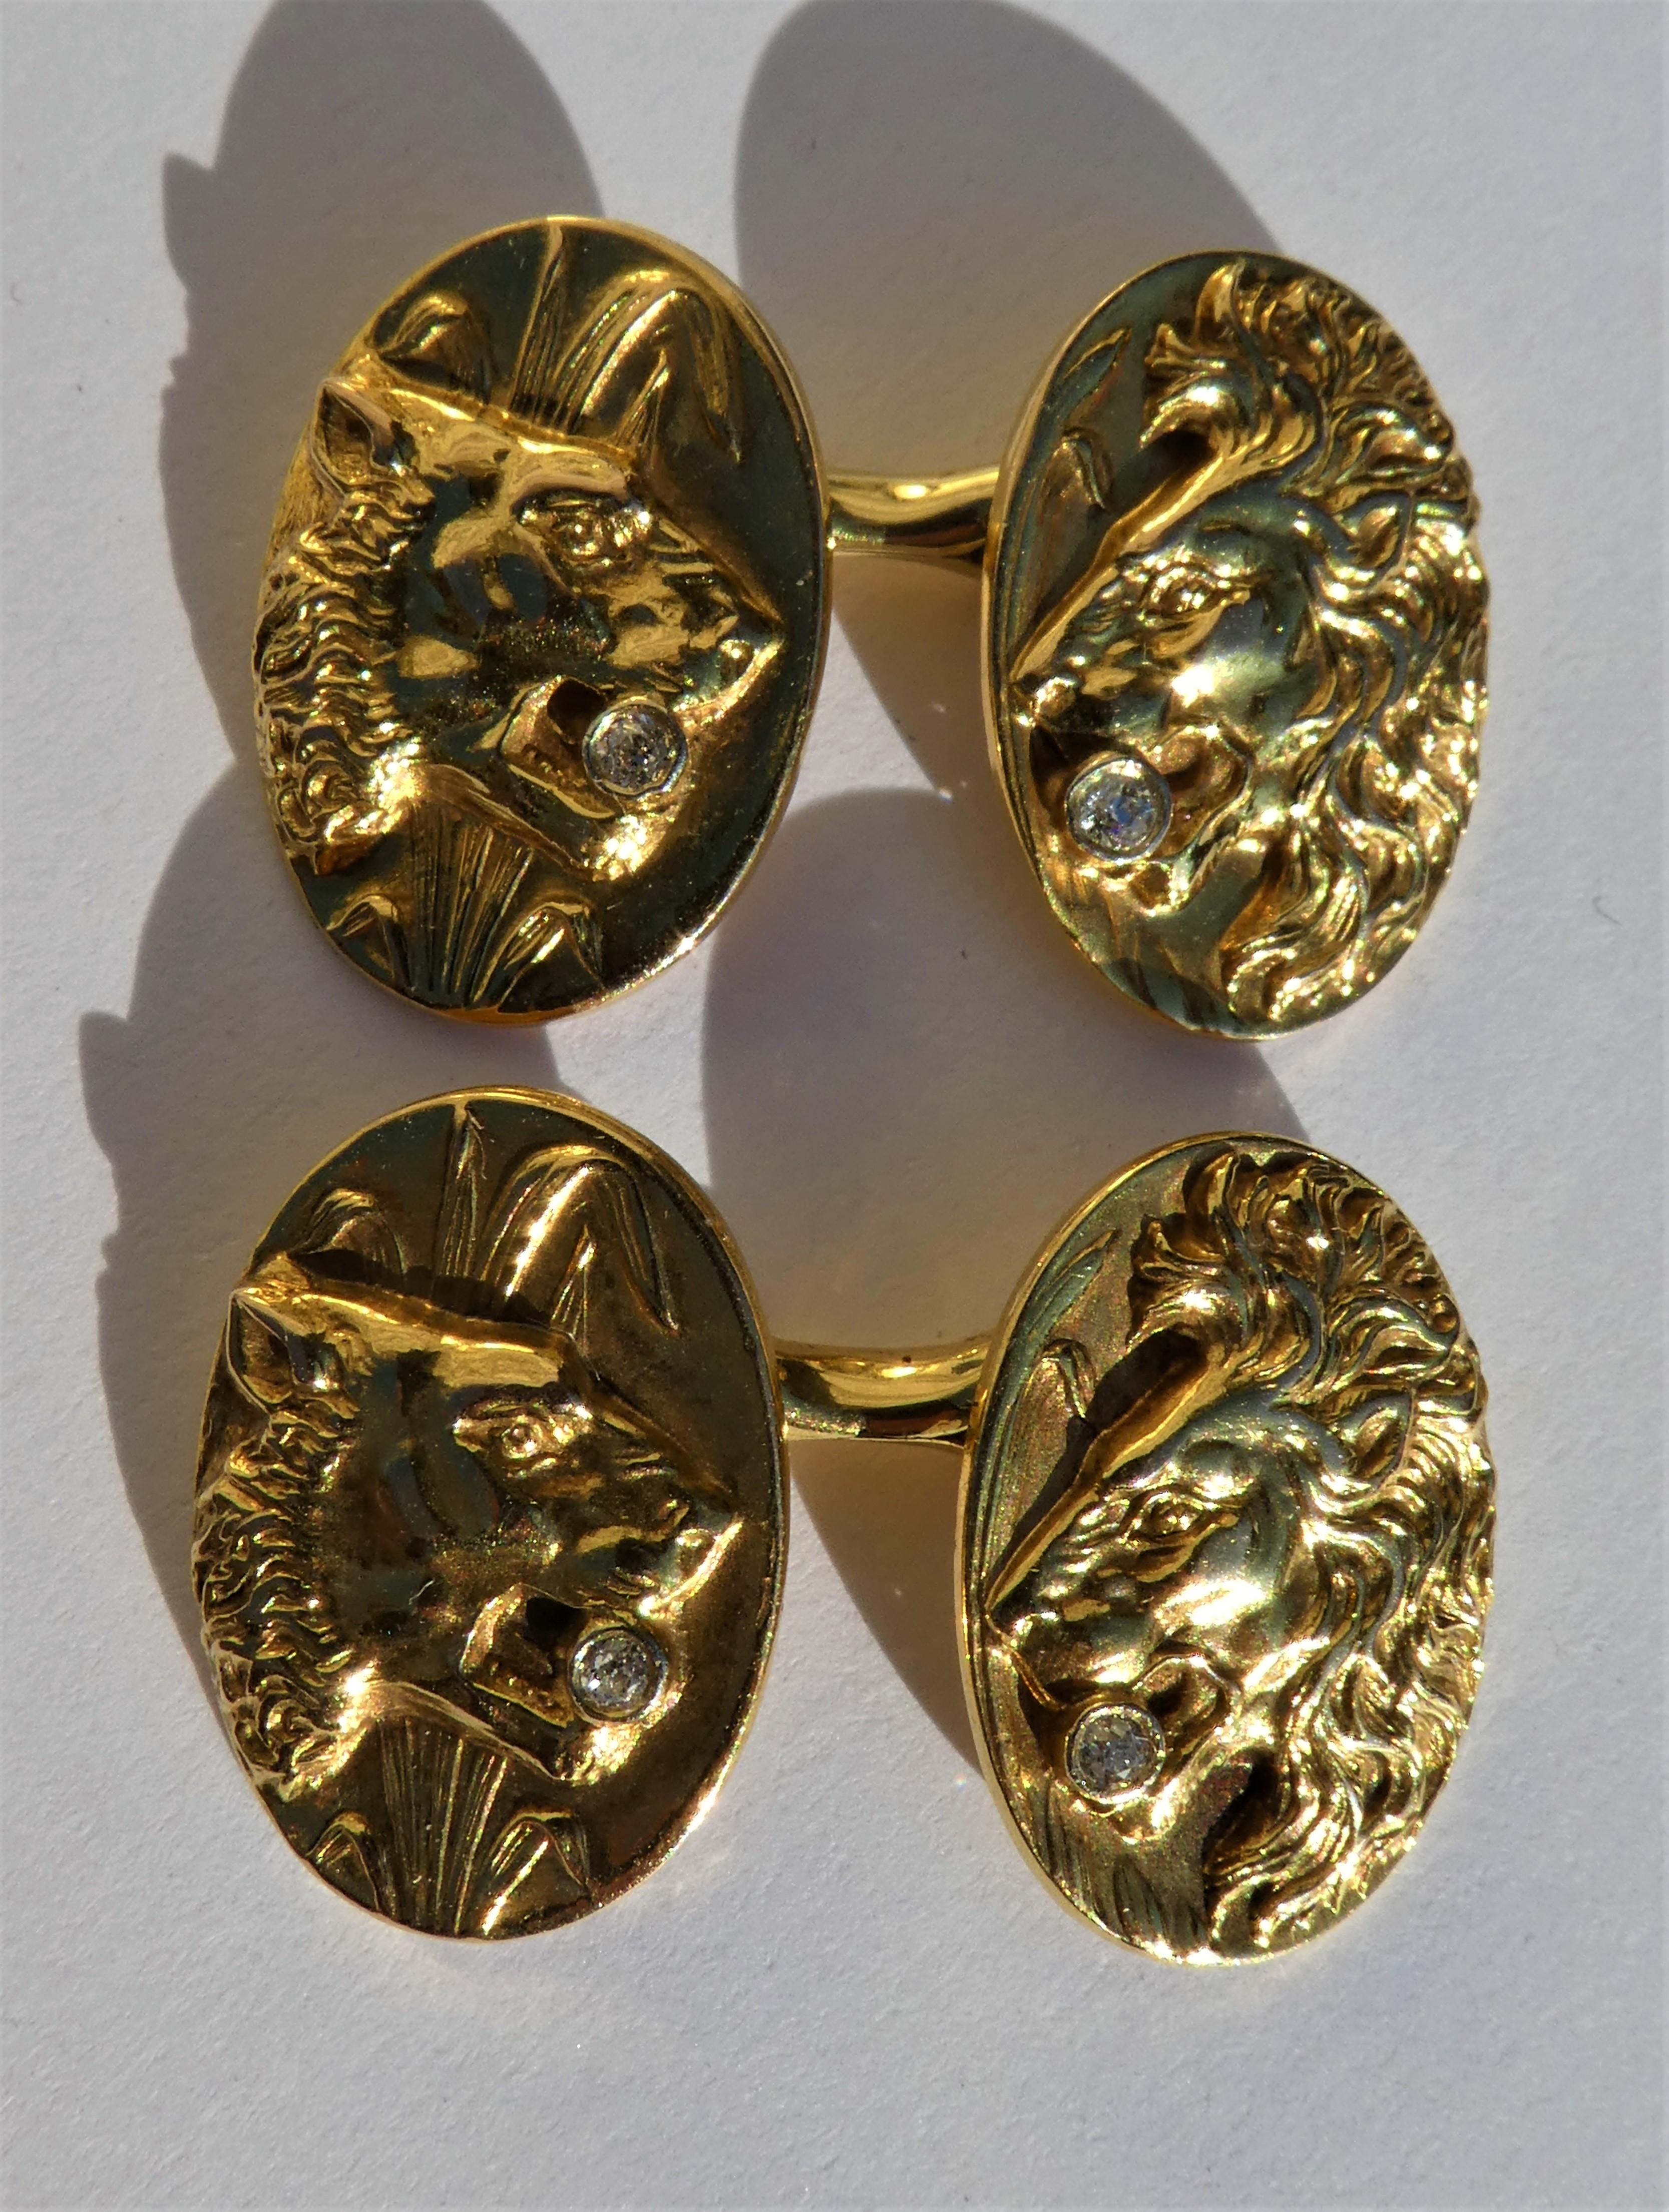 These wonderful oval double cufflinks were crafted in the United States around 1900 in the Art Nouveau period in 14 karat yellow gold. On each cufflink there is one lion head facing the head of a lioness. The work is very detailed and naturalistic